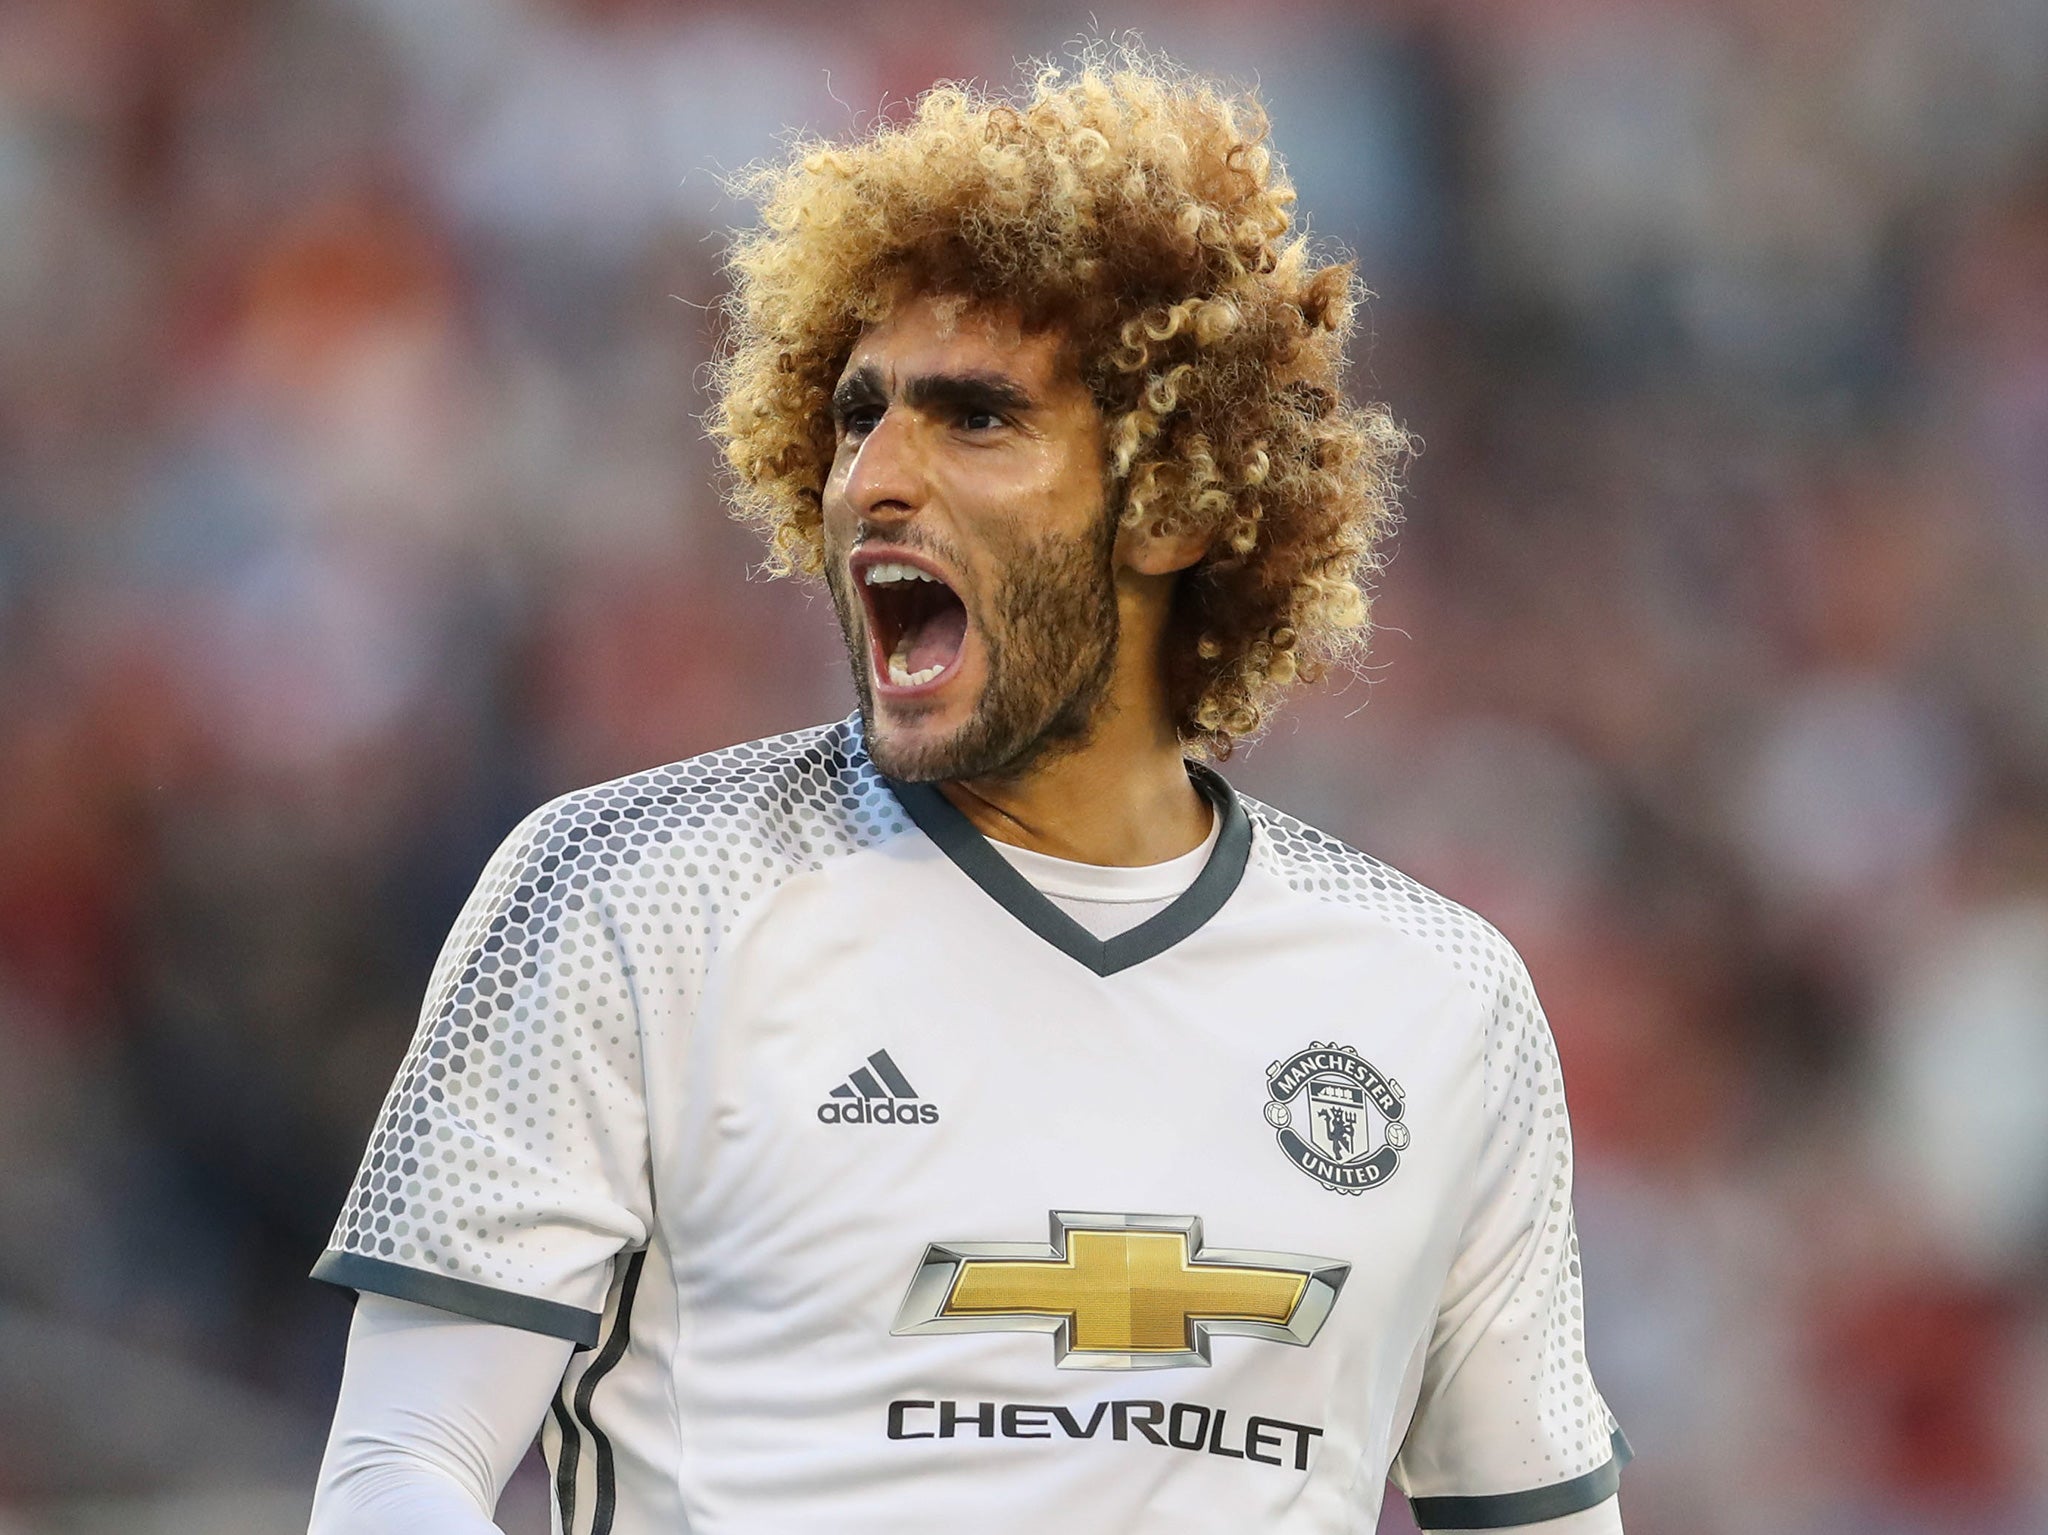 Fellaini has divided opinion the supporters since arriving in 2013